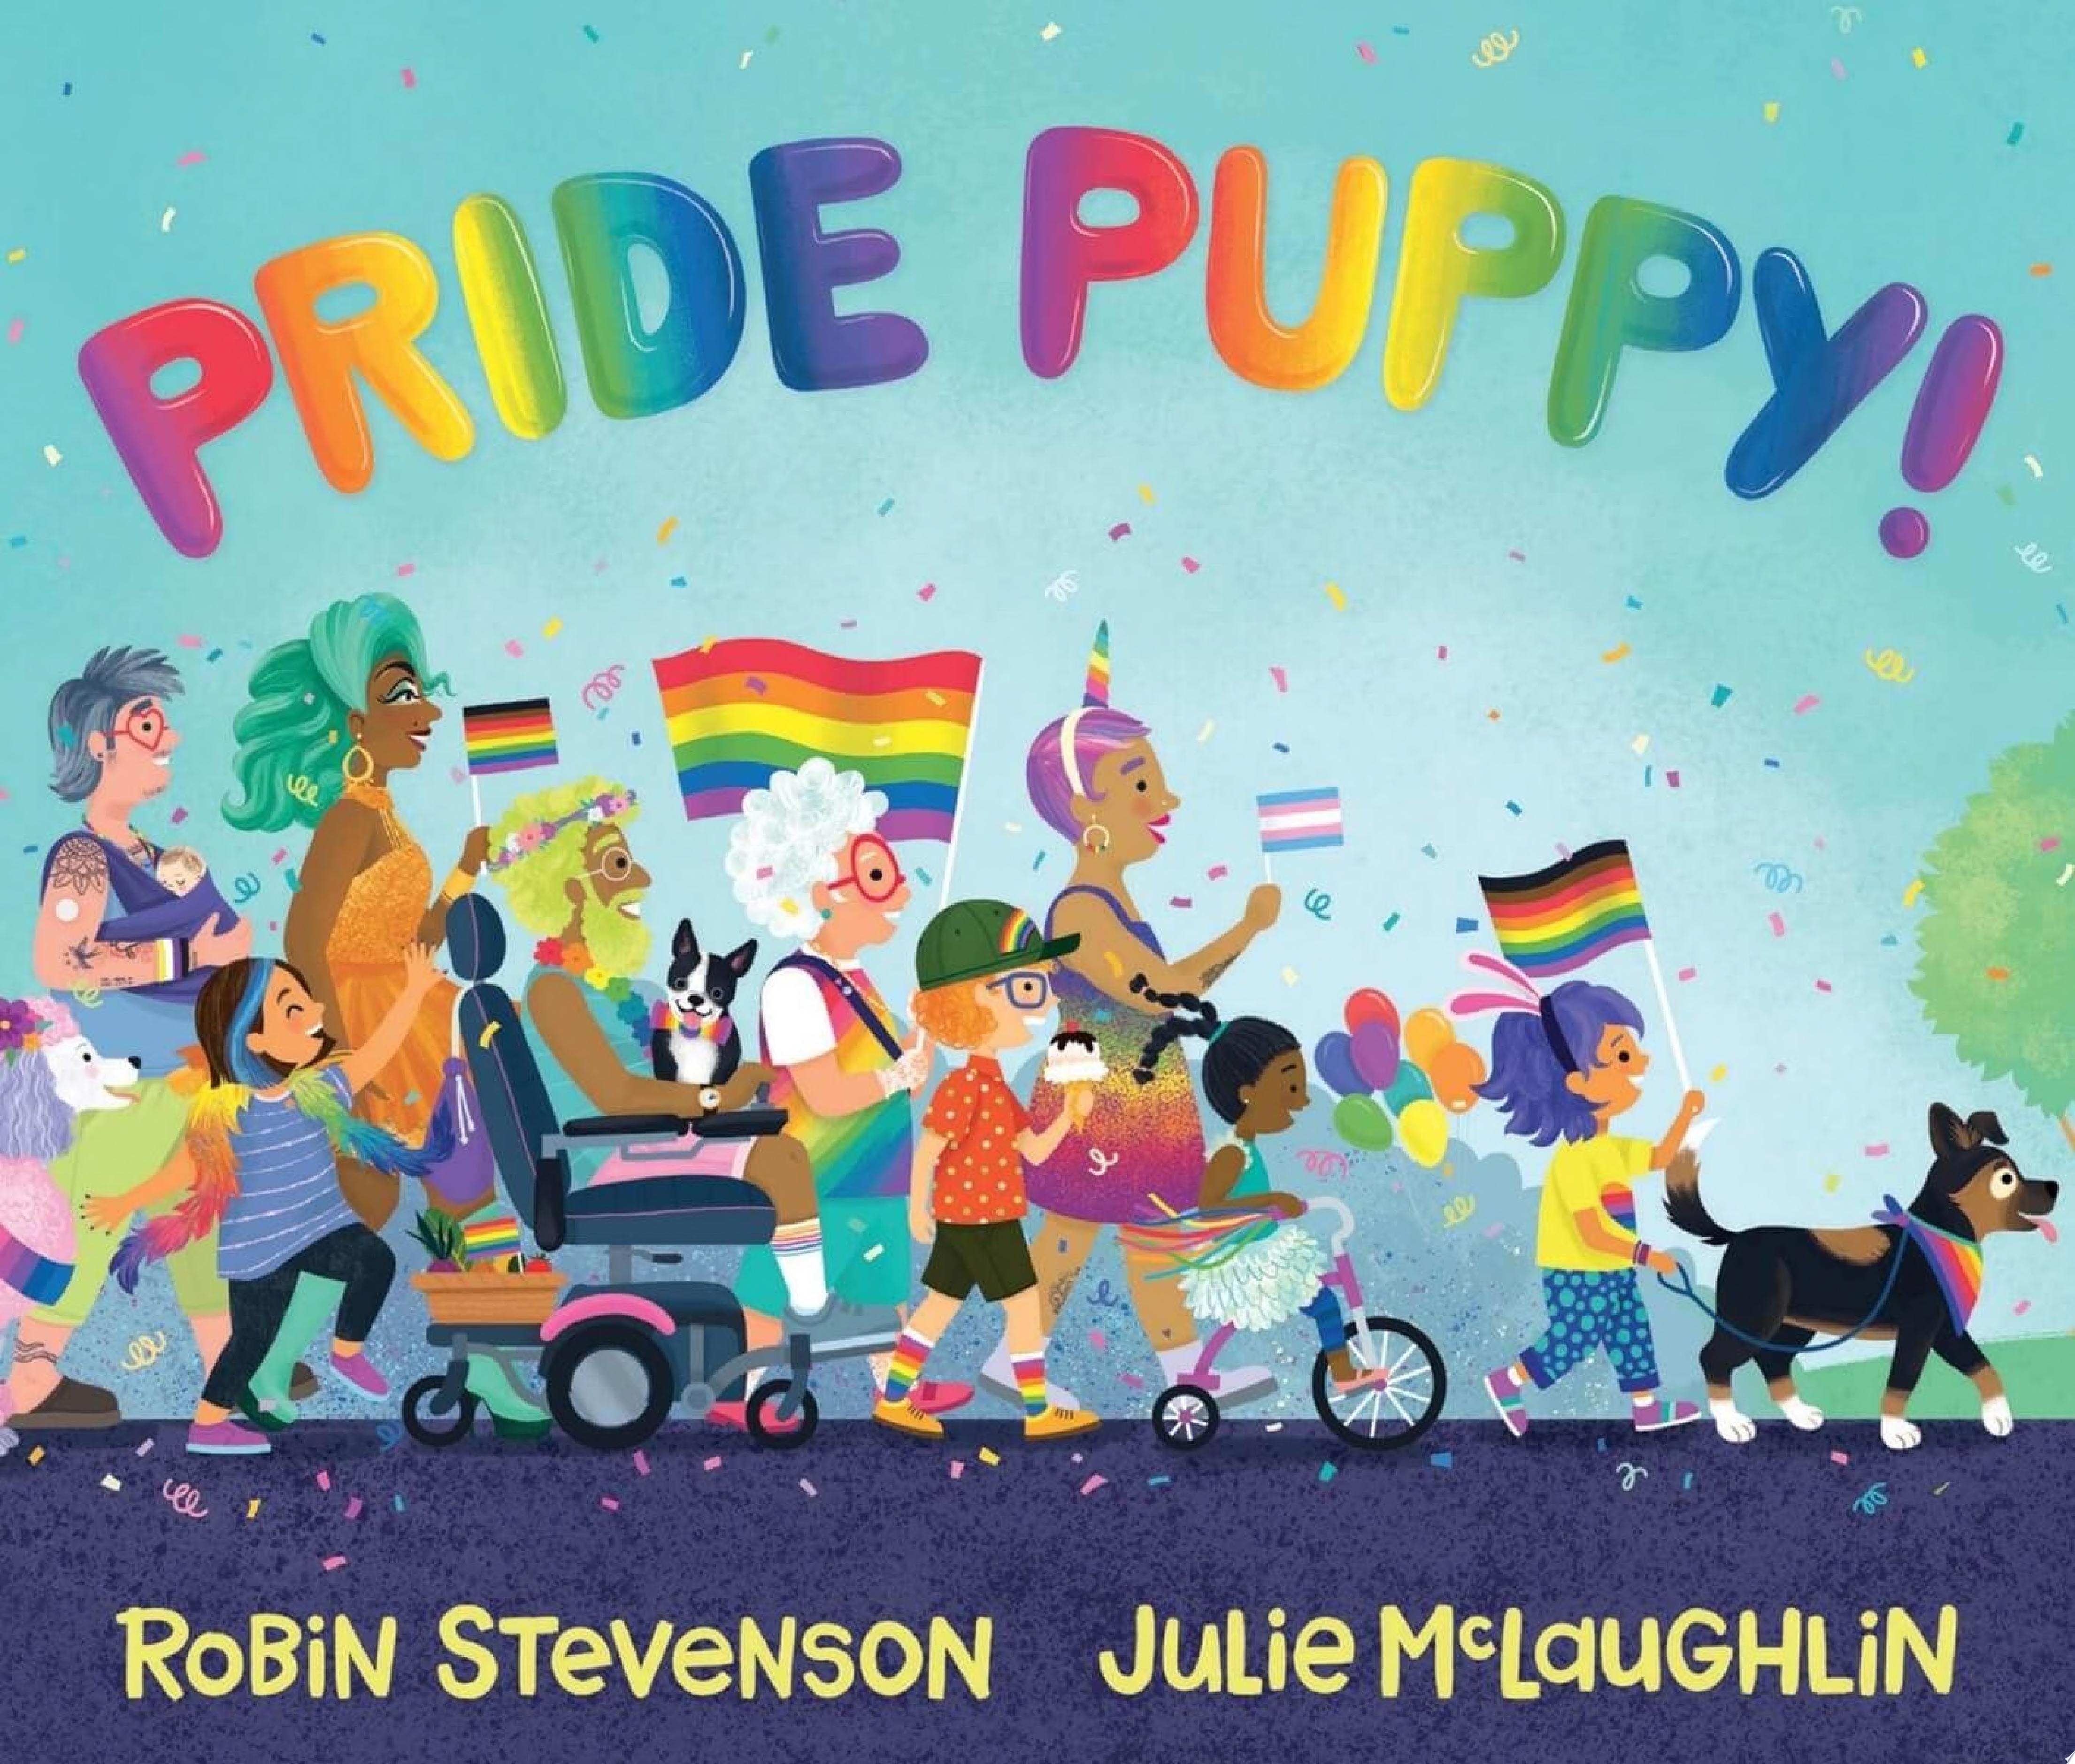 Image for "Pride Puppy!"